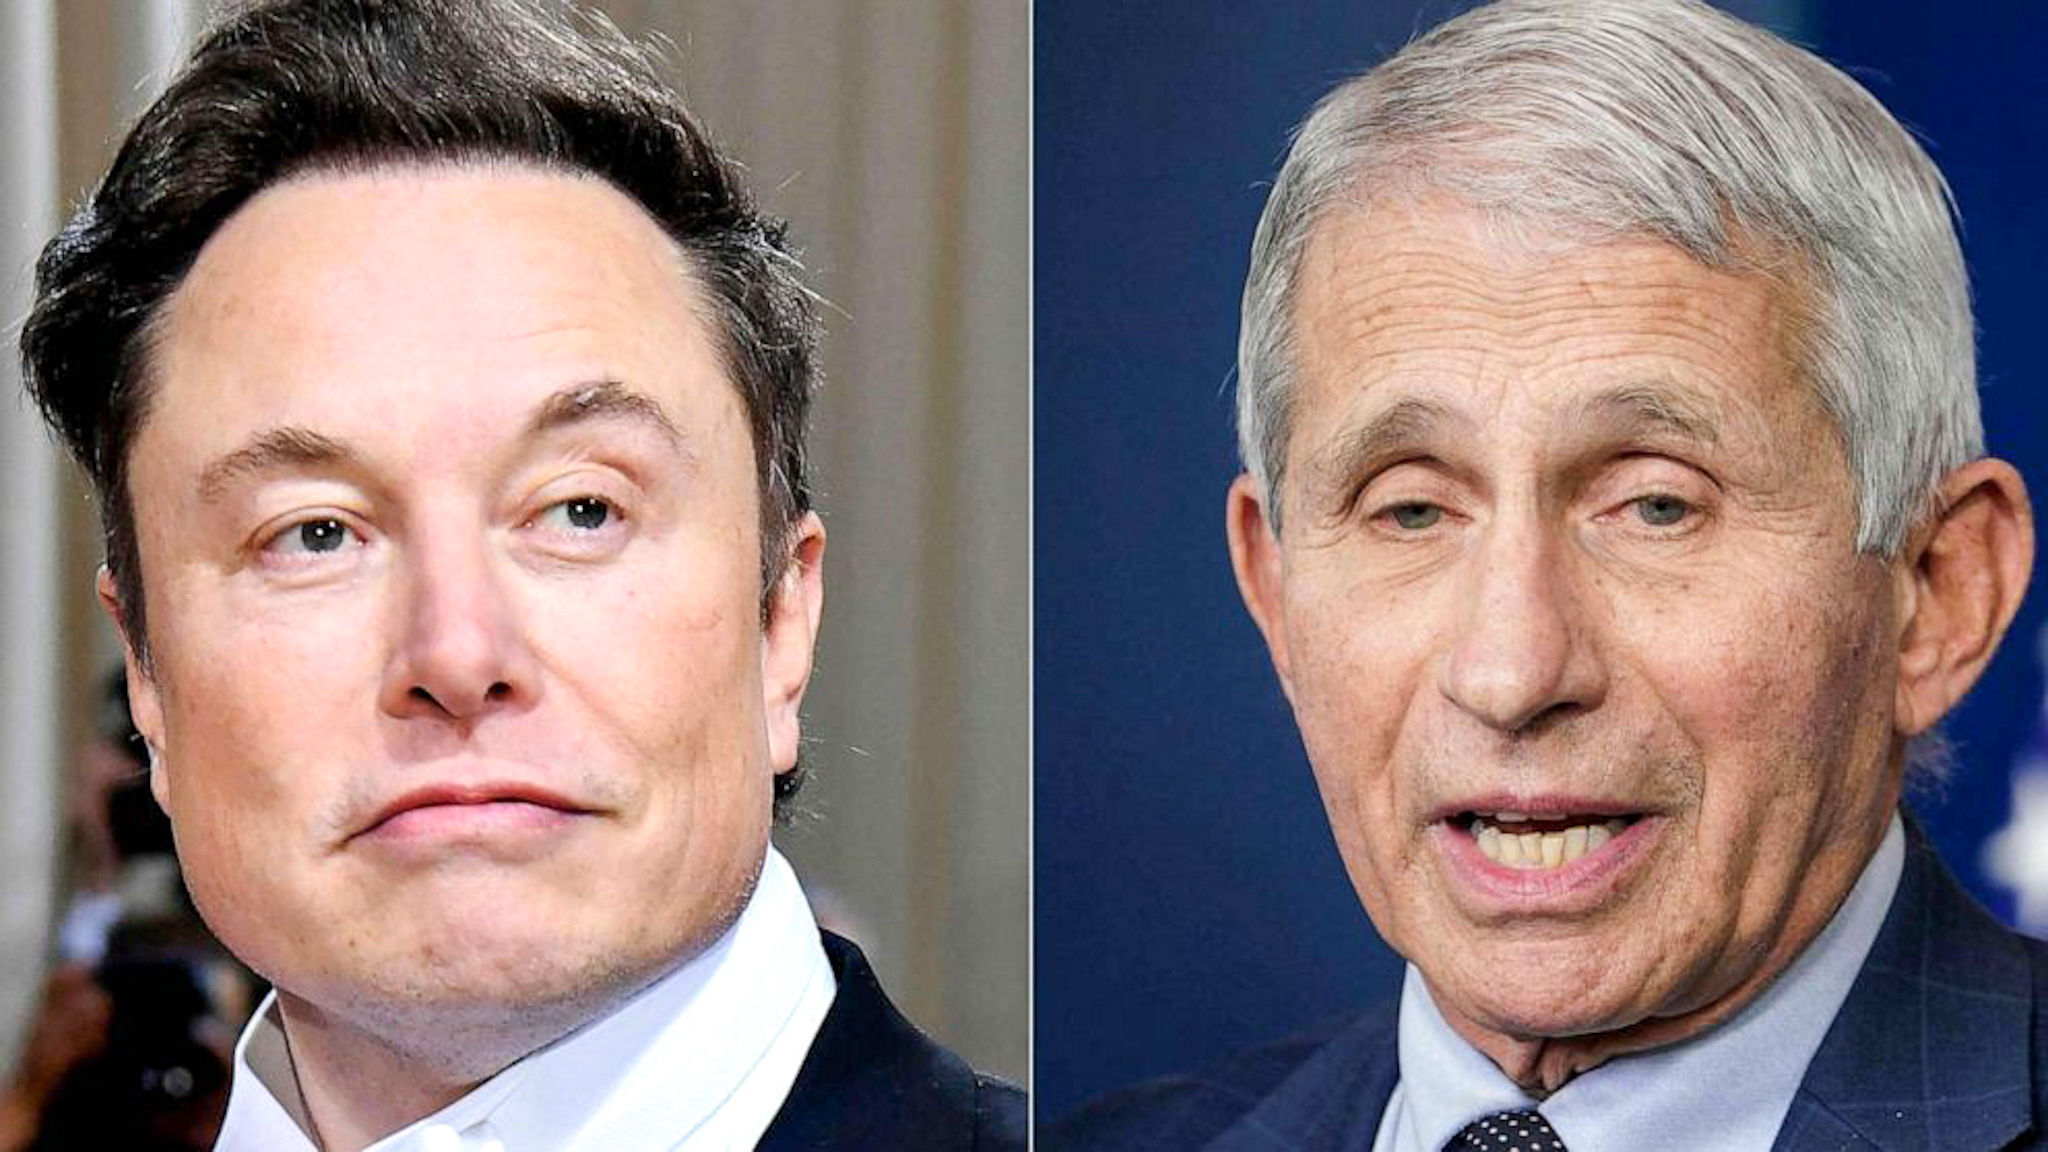 Elon Musk draws backlash applause for tweet calling for Fauci to be prosecuted